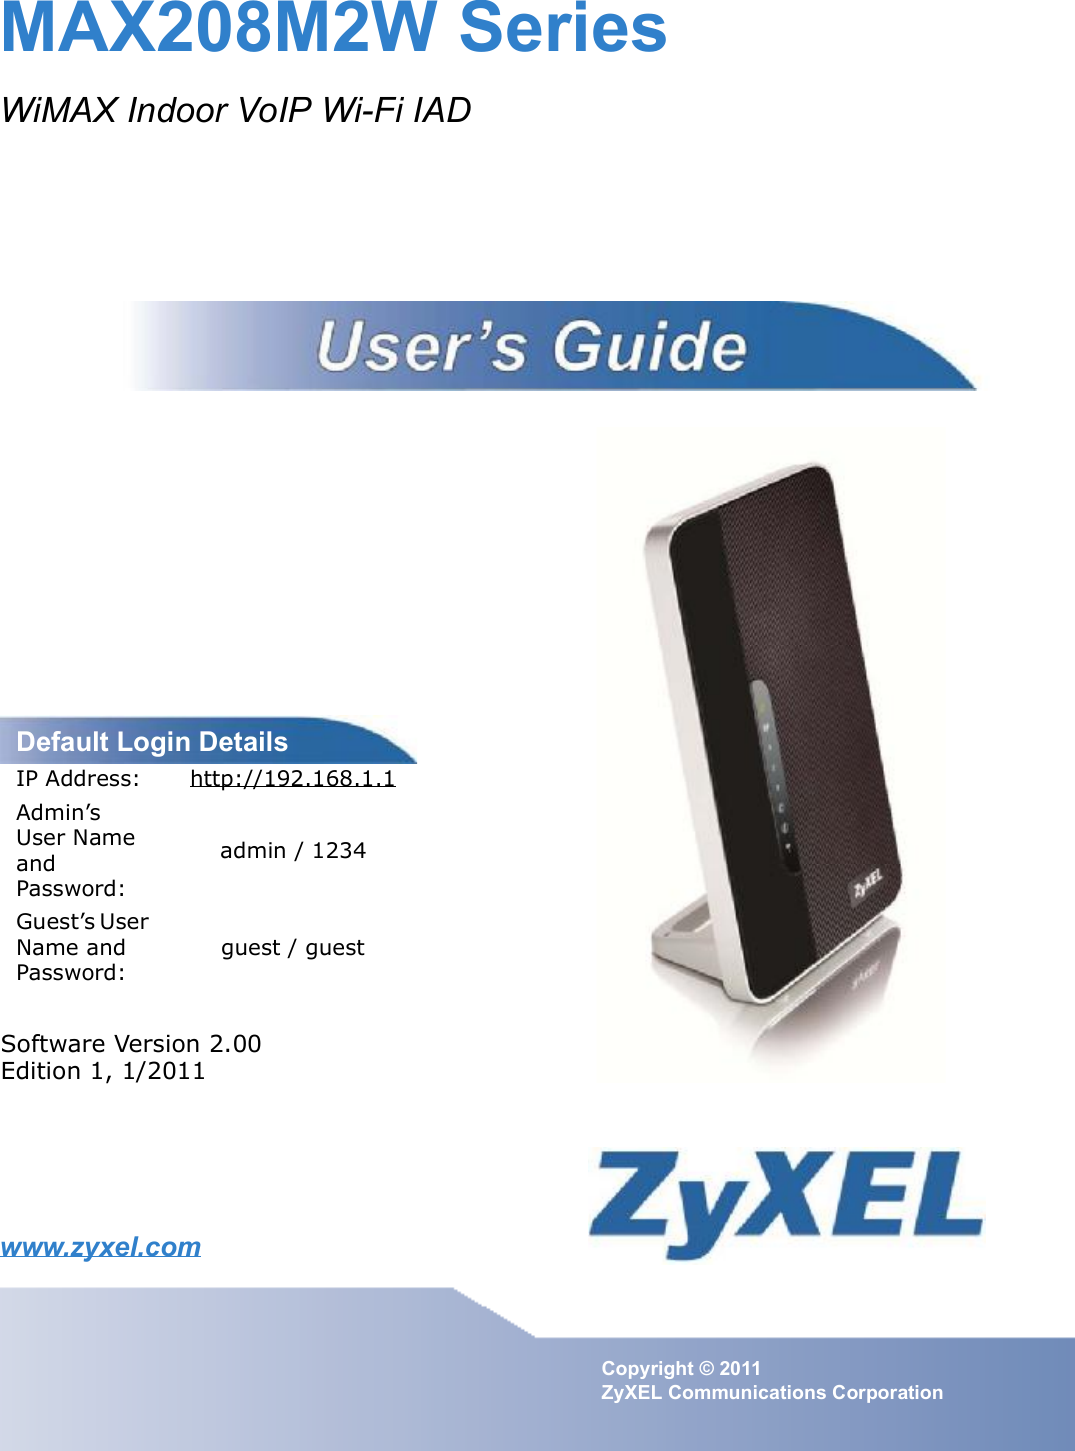 www.zyxel.comwww.zyxel.comMAX208M2W SeriesWiMAX Indoor VoIP Wi-Fi IADCopyright © 2011ZyXEL Communications CorporationSoftware Version 2.00Edition 1, 1/2011Default Login DetailsIP Address: http://192.168.1.1Admin s User Name and Password:admin / 1234Guest s User Name and Password:guest / guest 